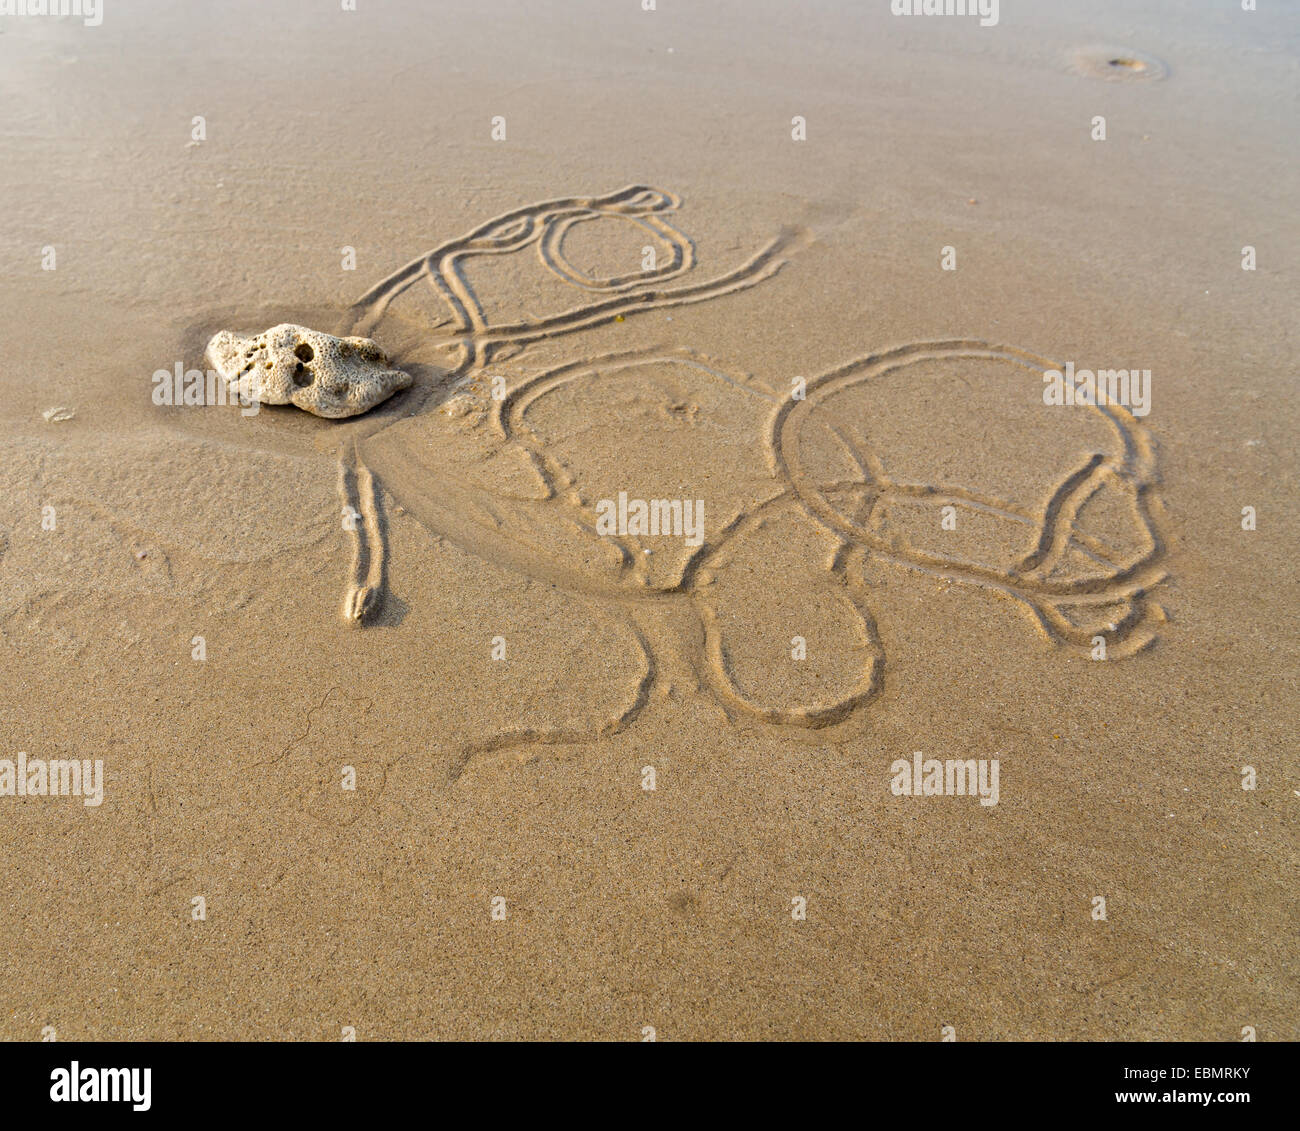 https://c8.alamy.com/comp/EBMRKY/beach-worm-pulls-her-trail-at-low-tide-EBMRKY.jpg